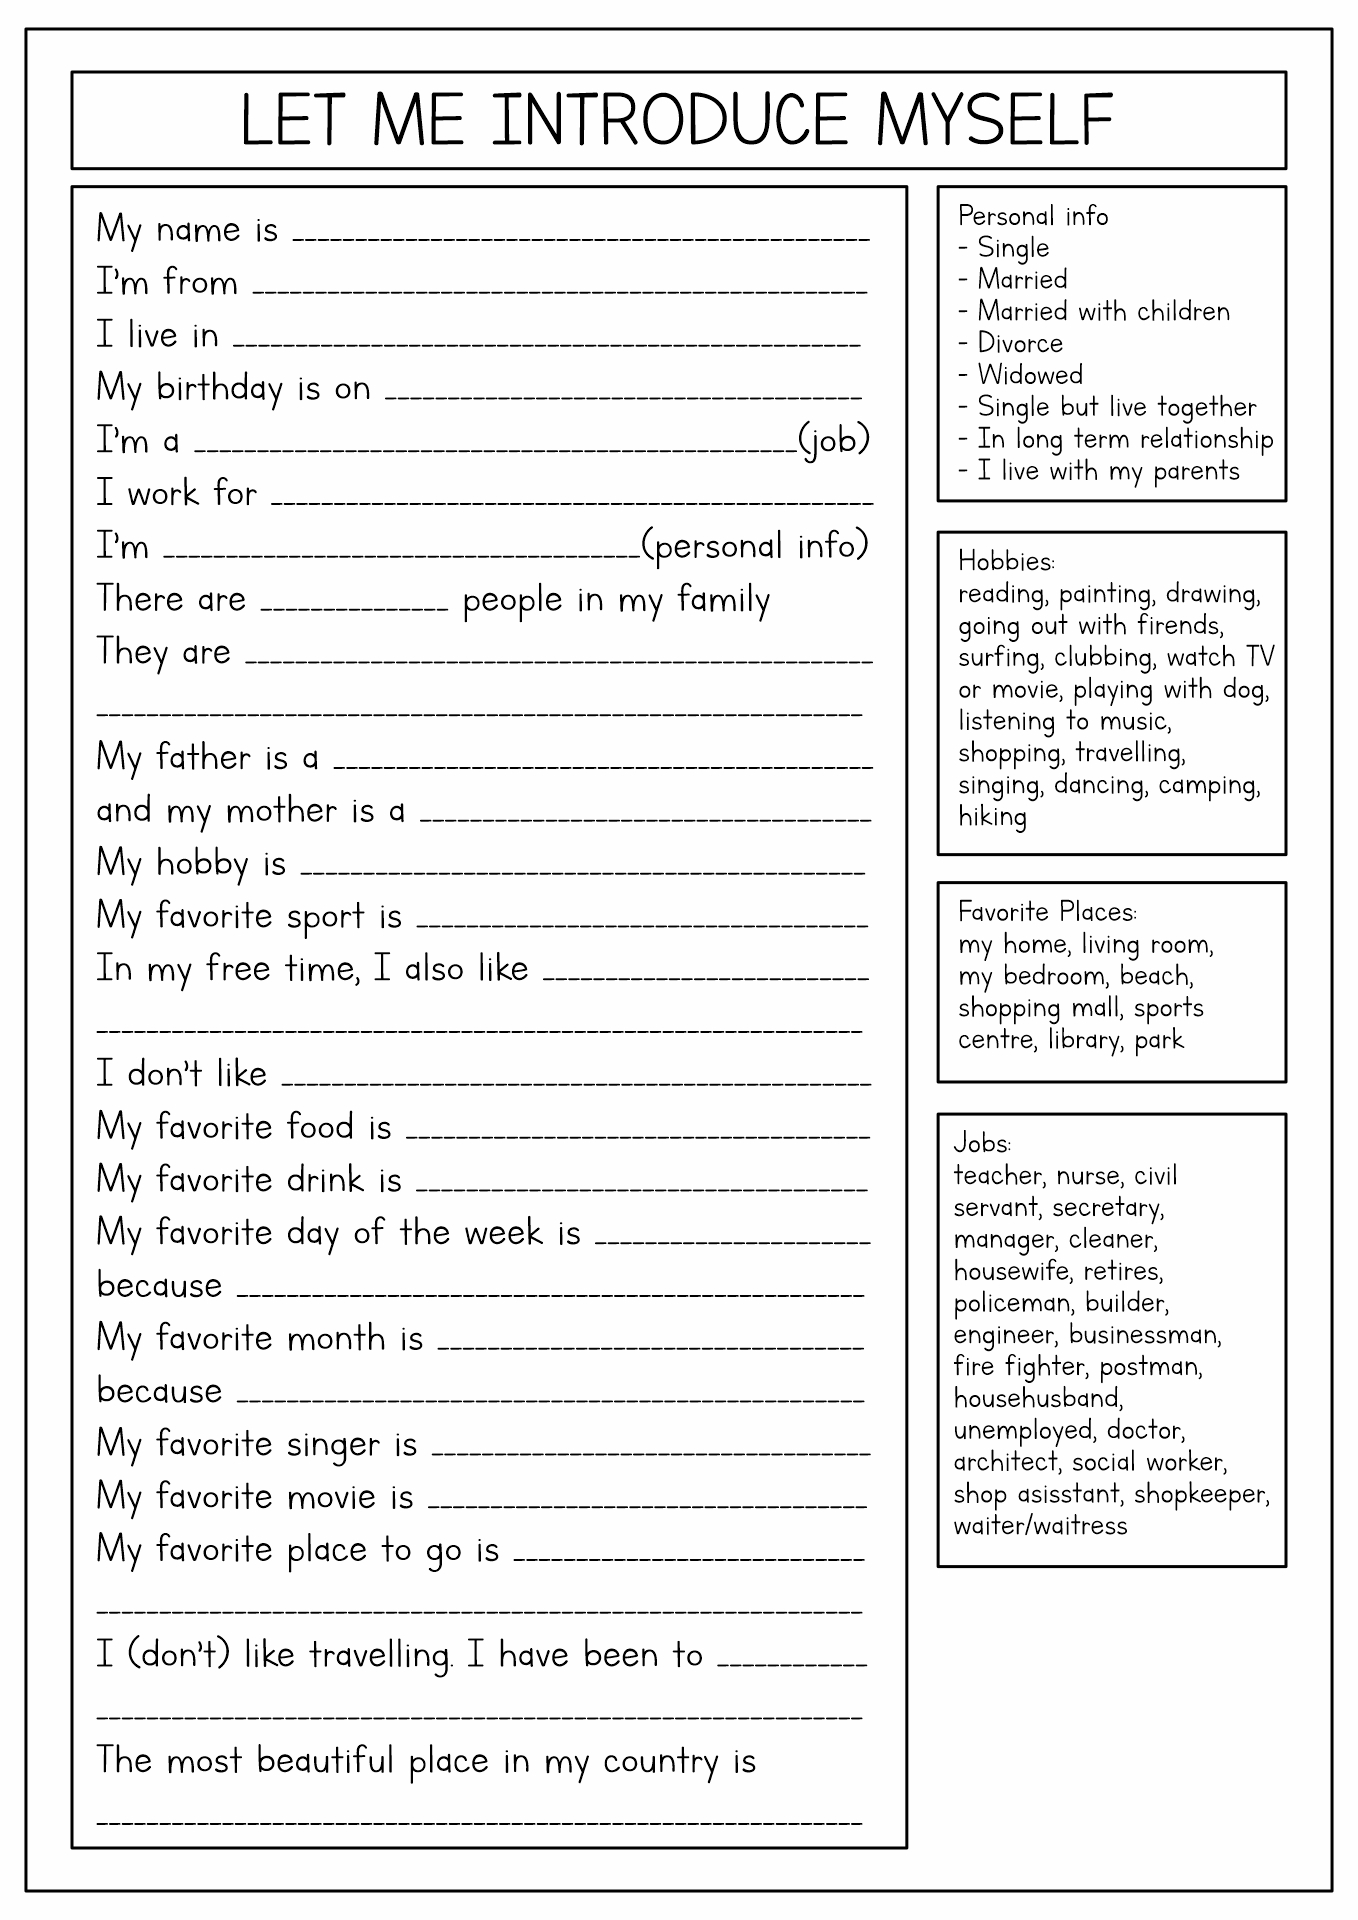 All About Me Adults Worksheets Image